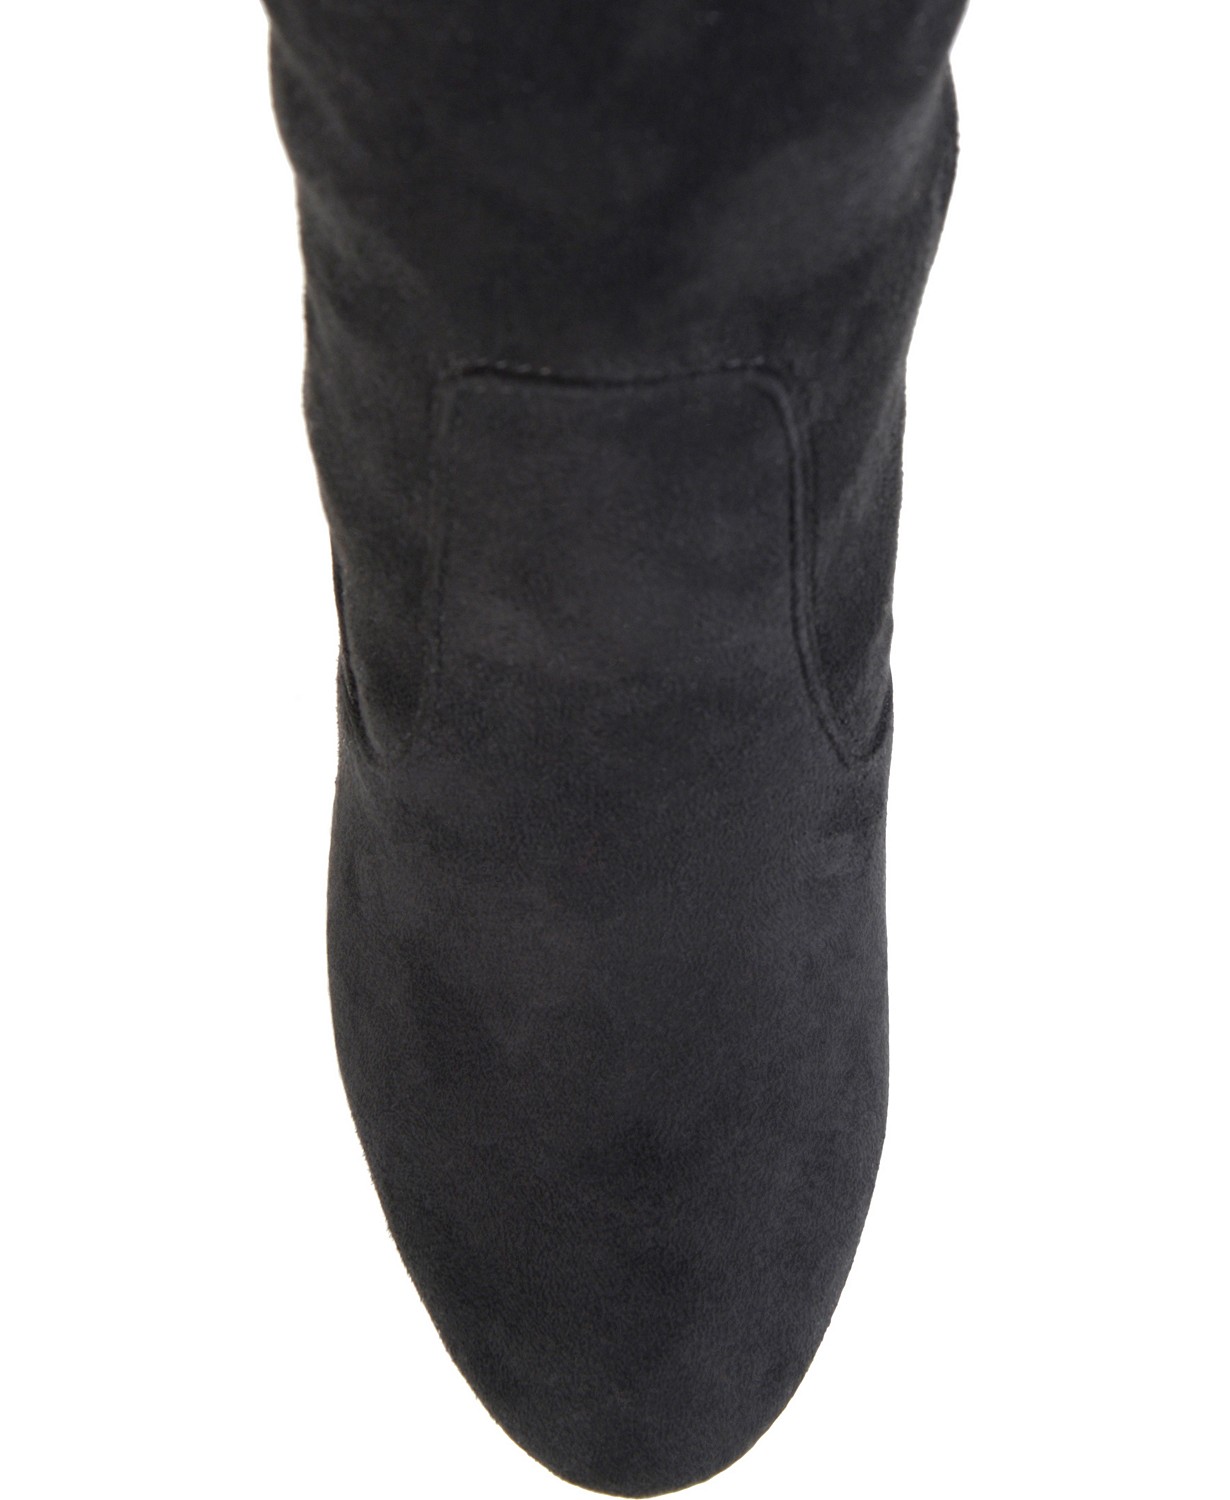 www.couturepoint.com-journee-collection-womens-black-trill-lace-up-over-the-knee-boots-copy